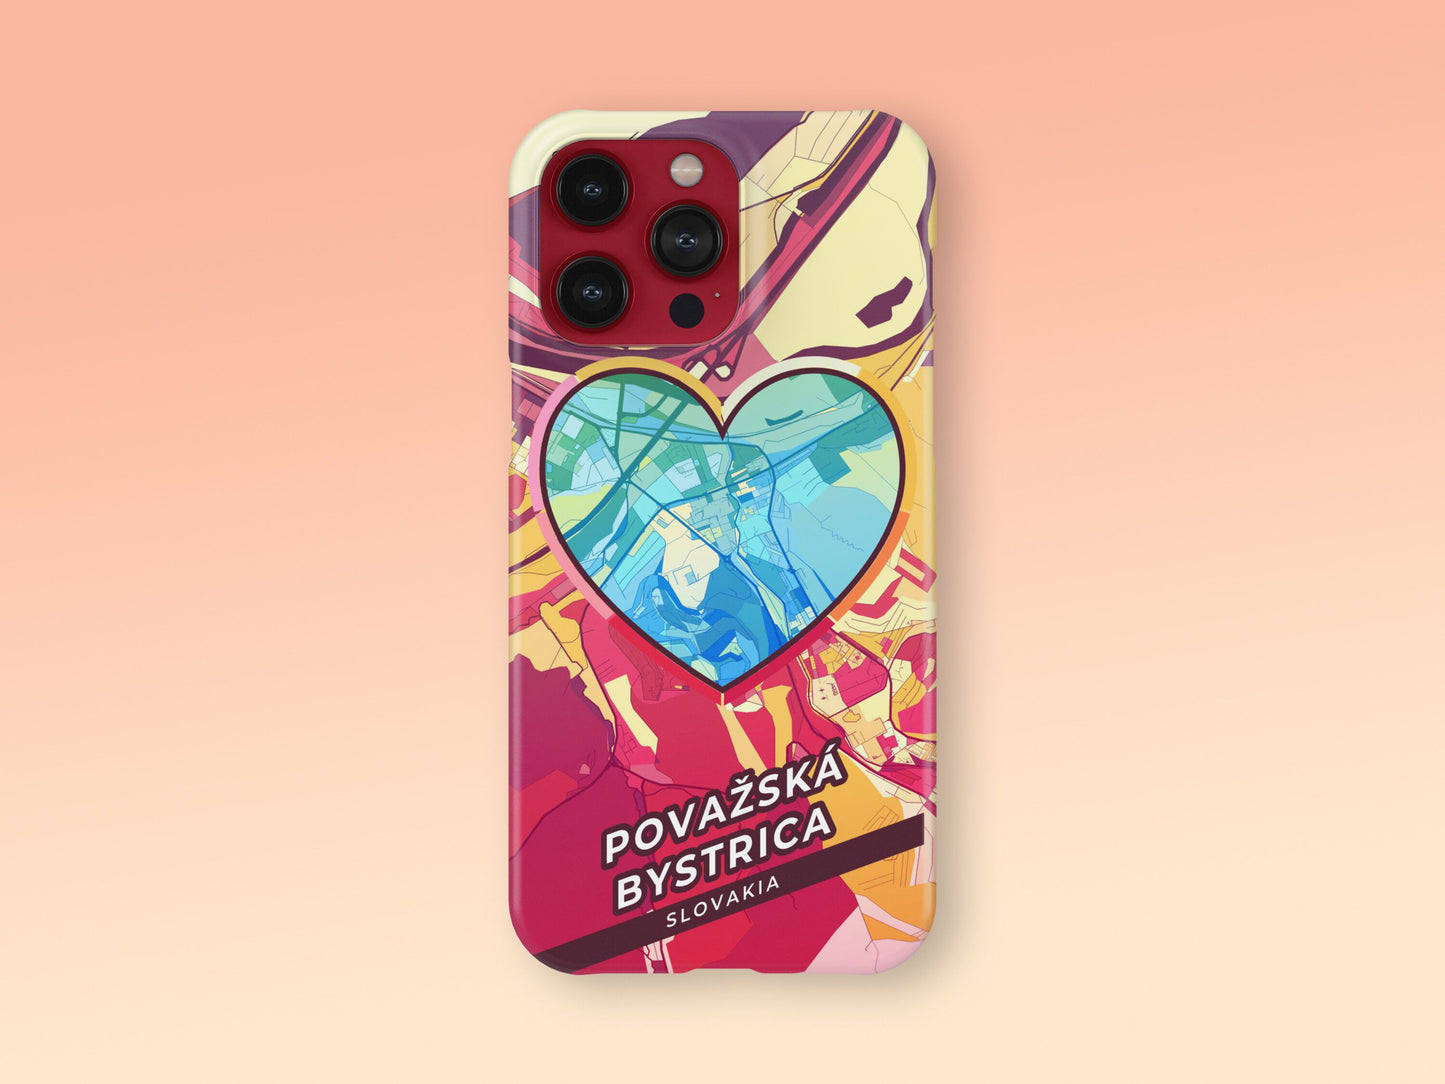 Považská Bystrica Slovakia slim phone case with colorful icon. Birthday, wedding or housewarming gift. Couple match cases. 2